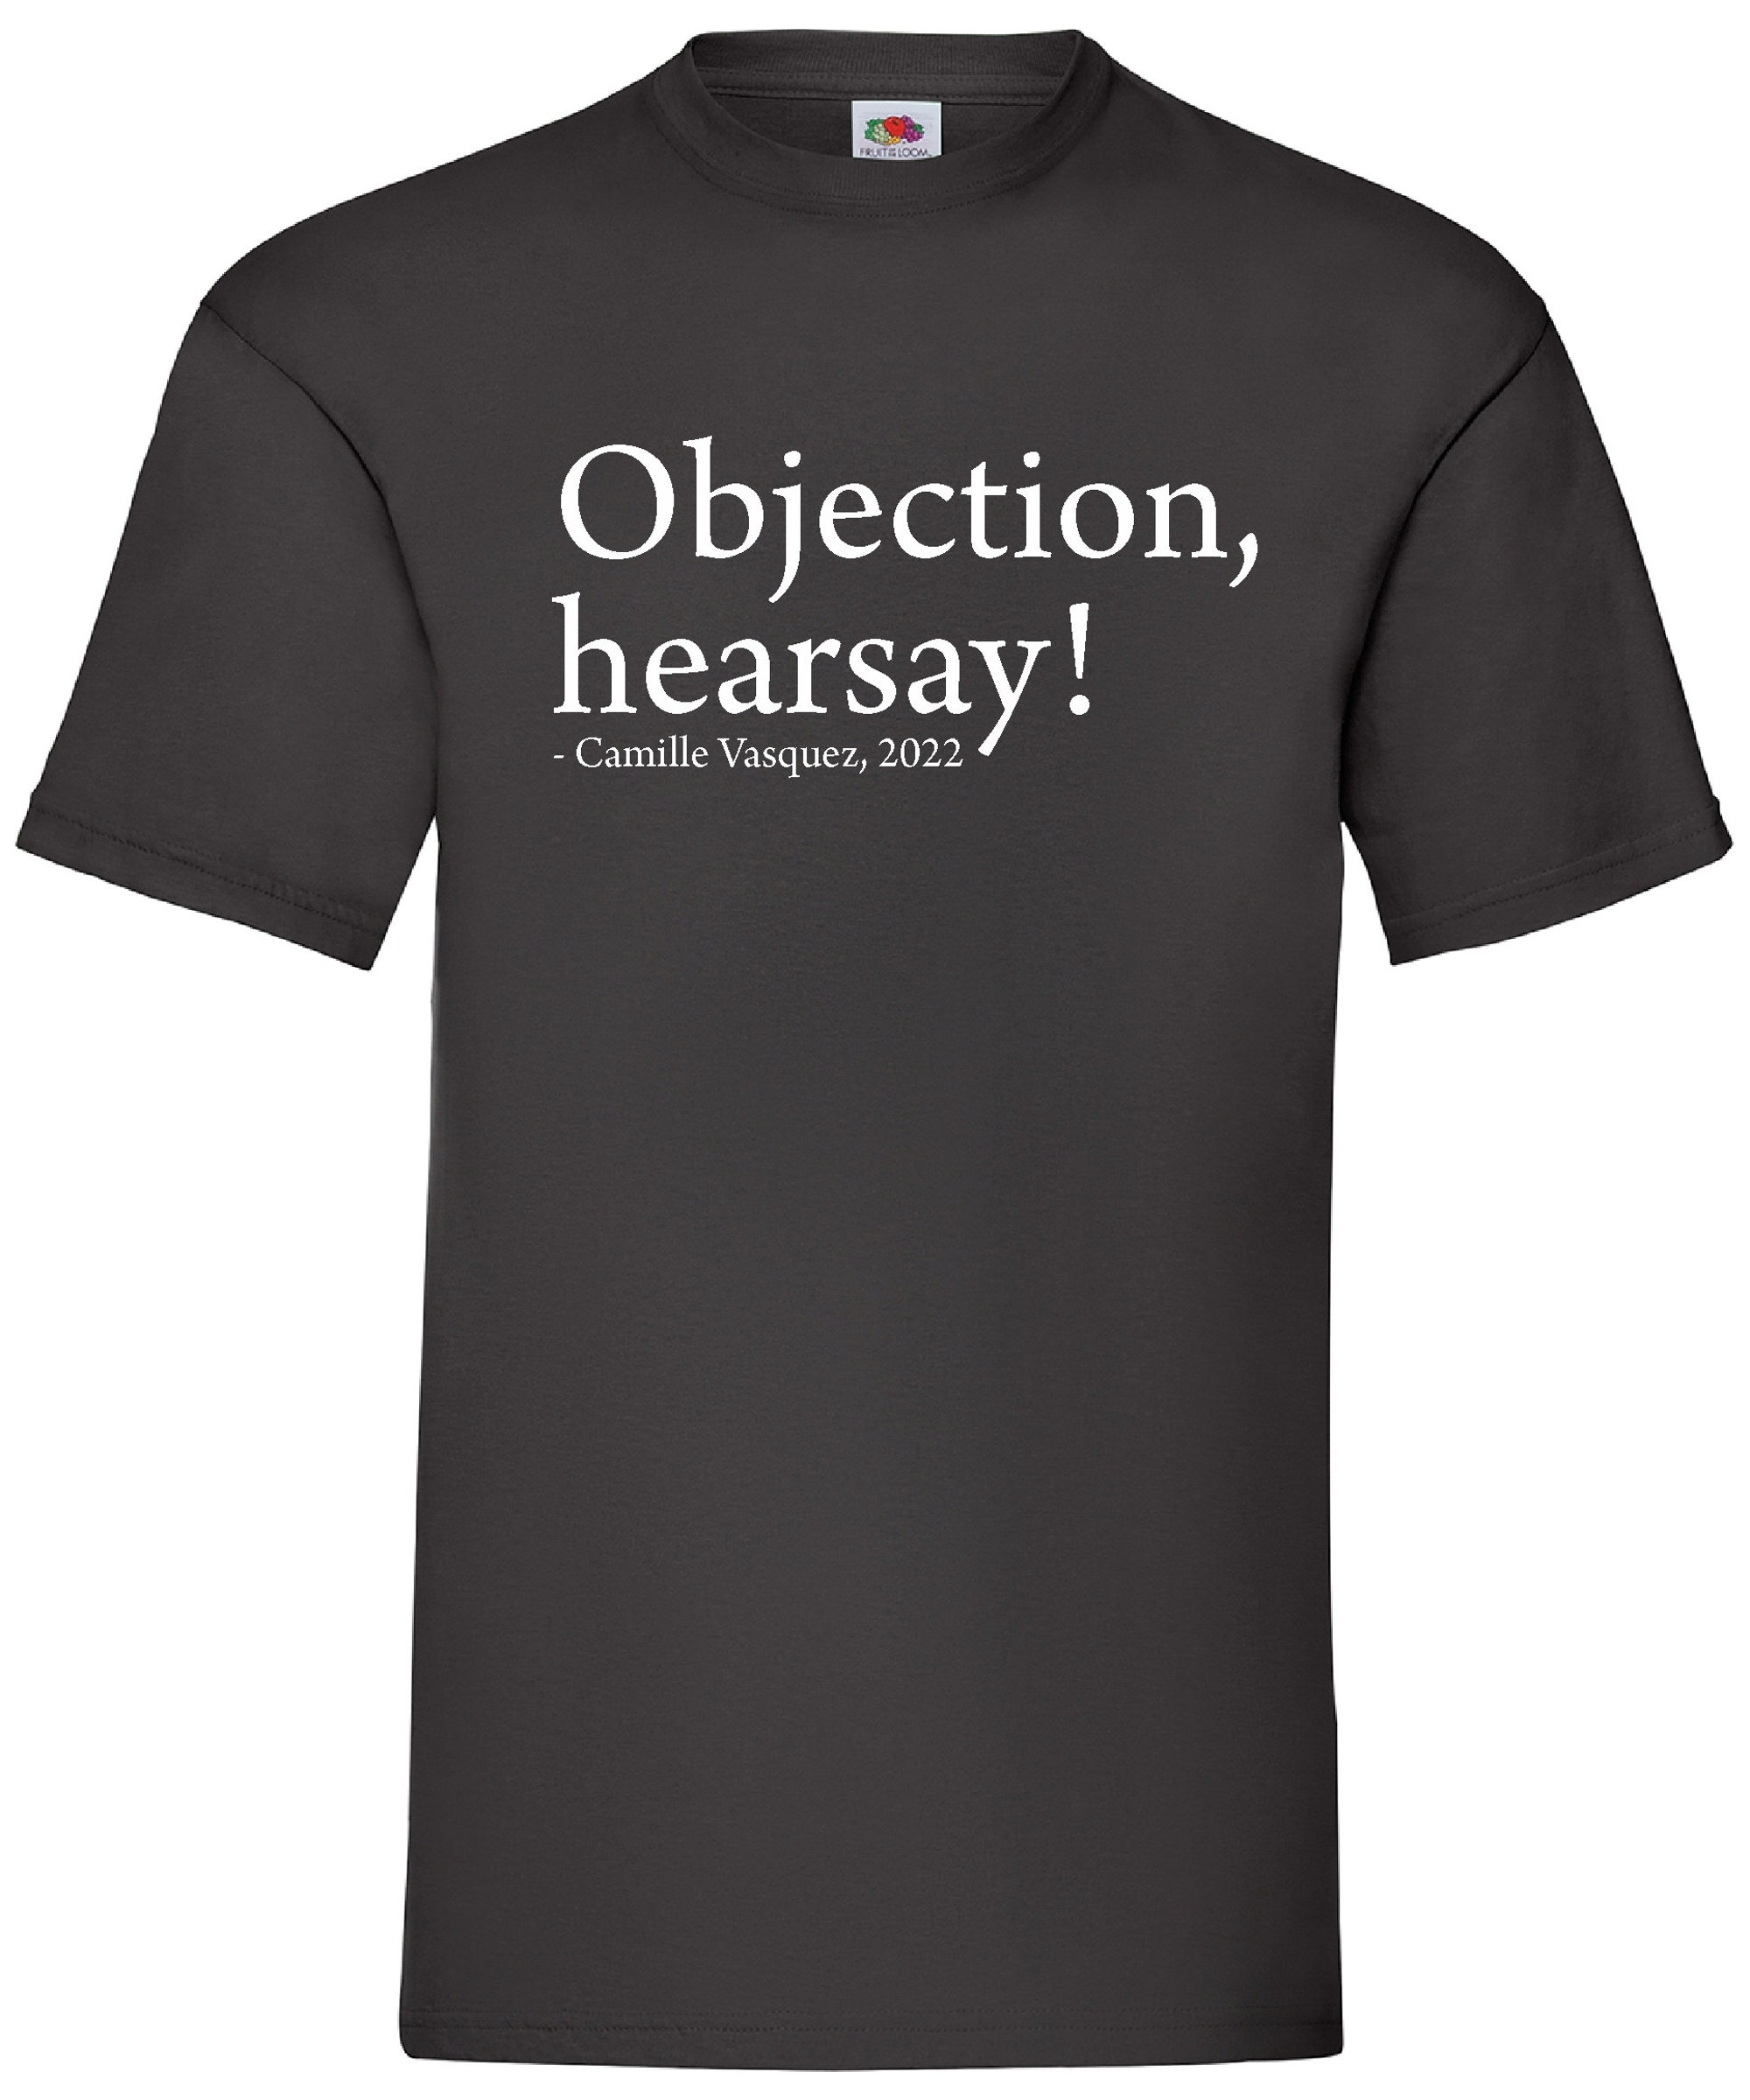 Objection Hearsay Camille Vasquez T-Shirt, Justice for Johnny Depp T-Shirt